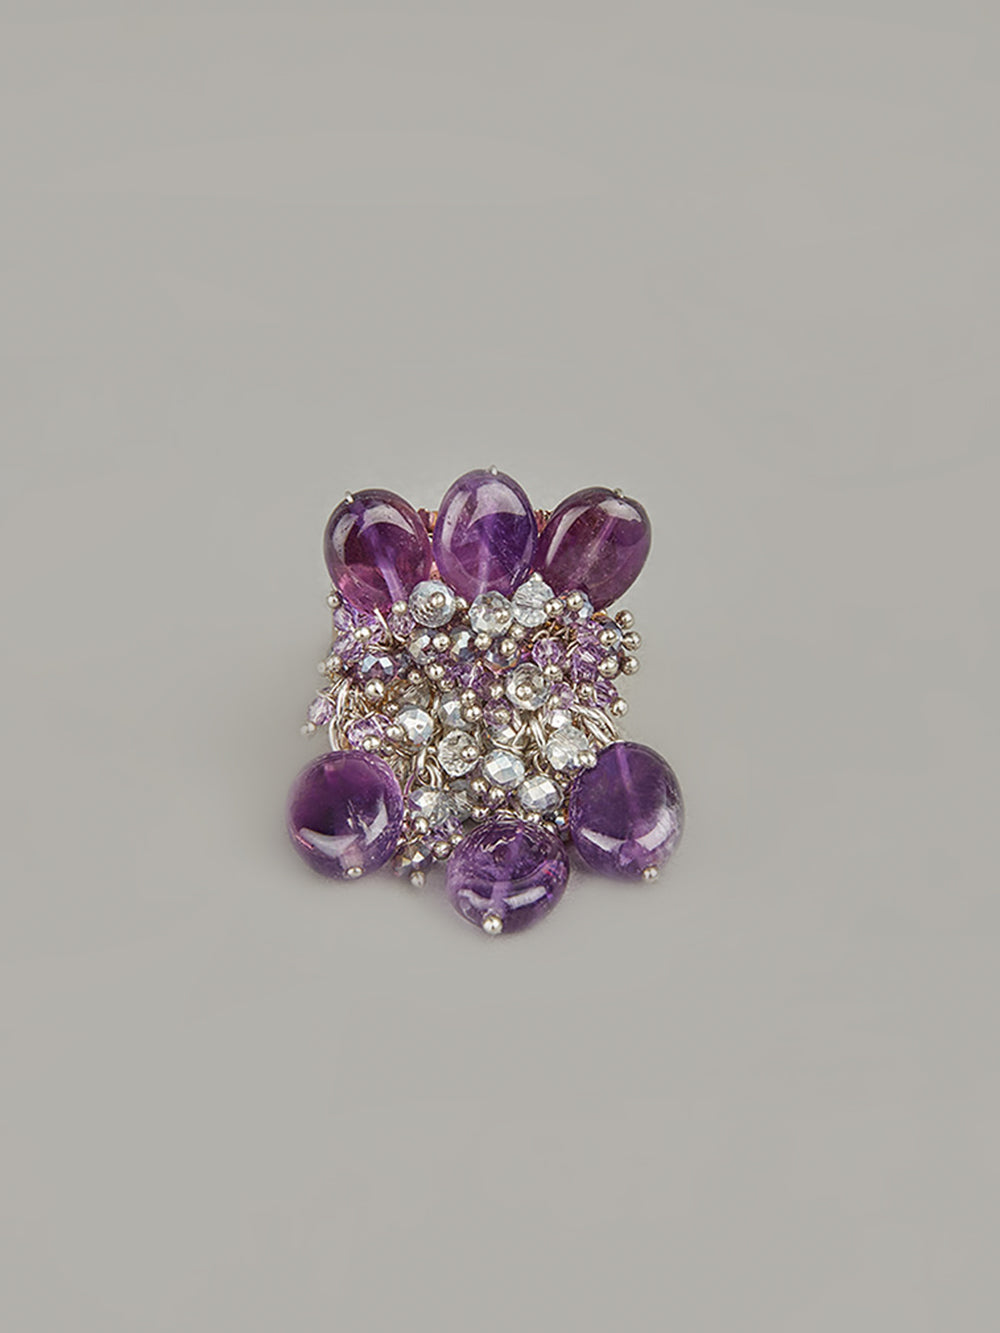 Amama,Handcrafted Amethyst Crystal Finger Ring